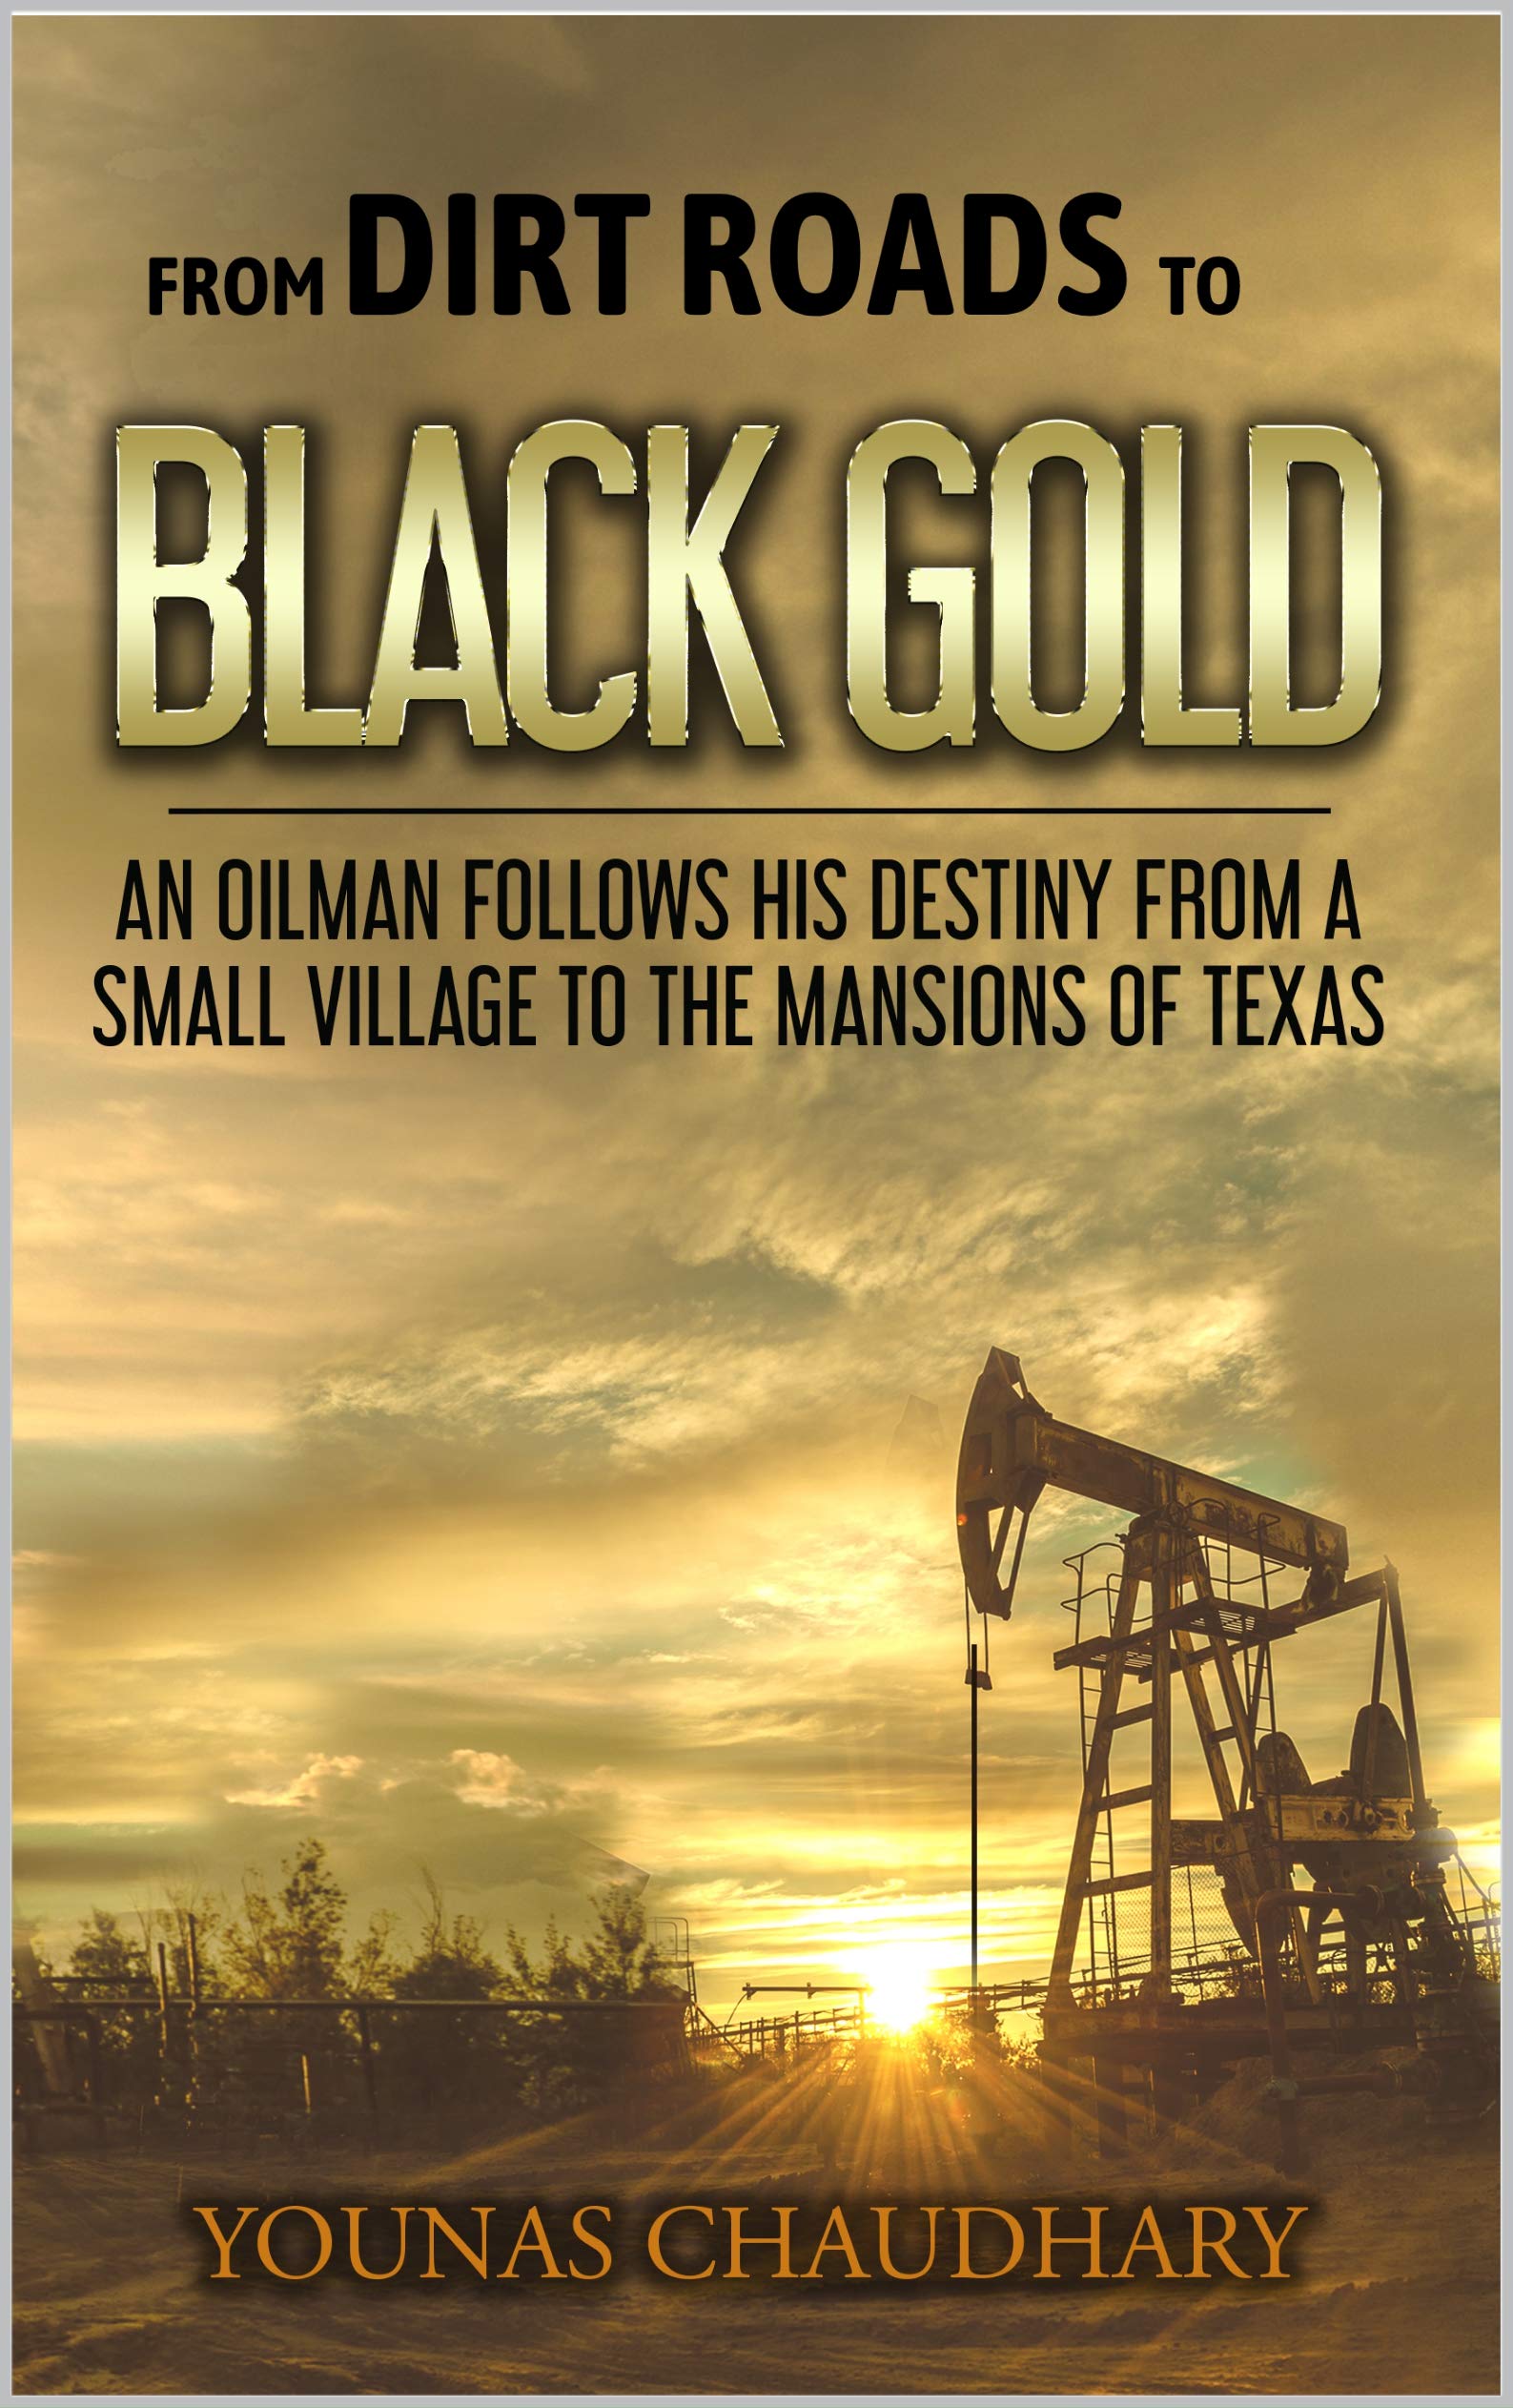 From Dirt Roads to Black Gold: An Oilman Follows His Destiny from a Small Village to the Mansions of Texas